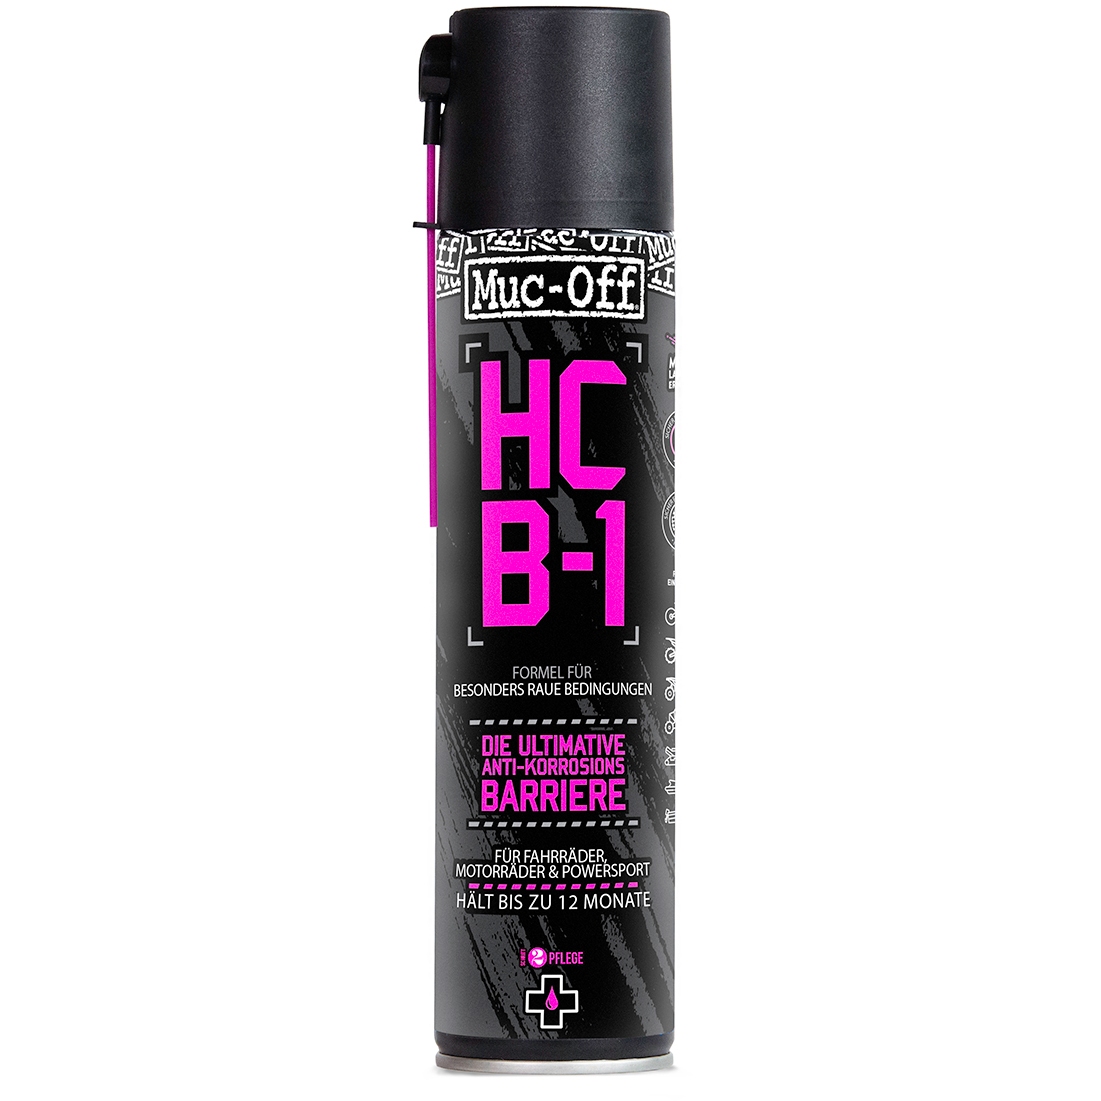 Productfoto van Muc-Off HCB-1 400ml Corrosion Protection - pink